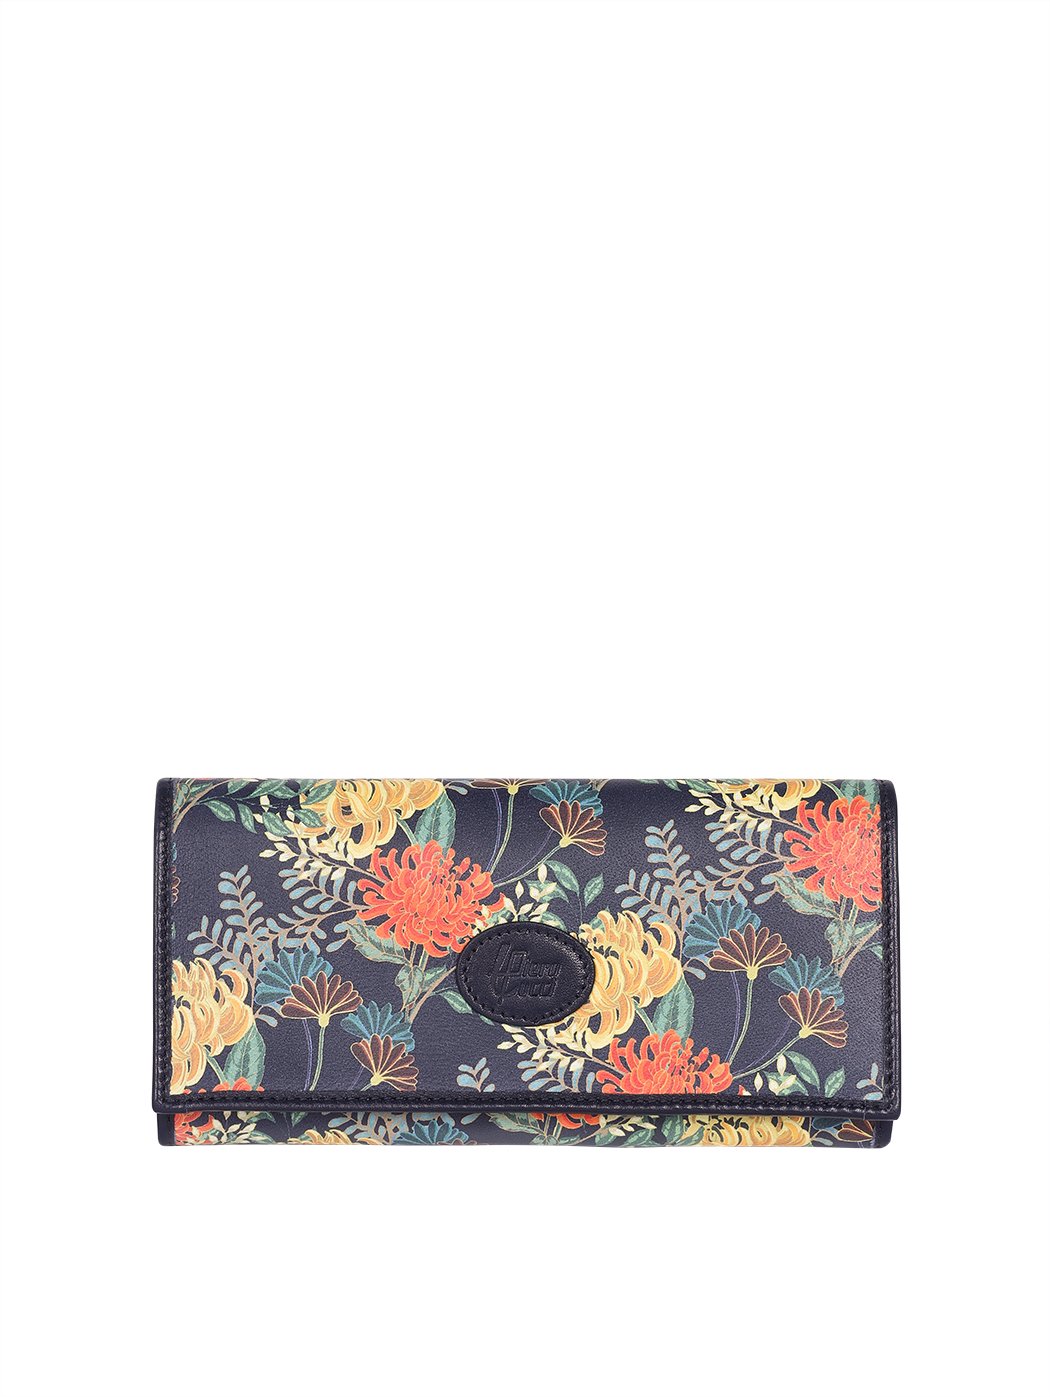 Floral printed leather wallet